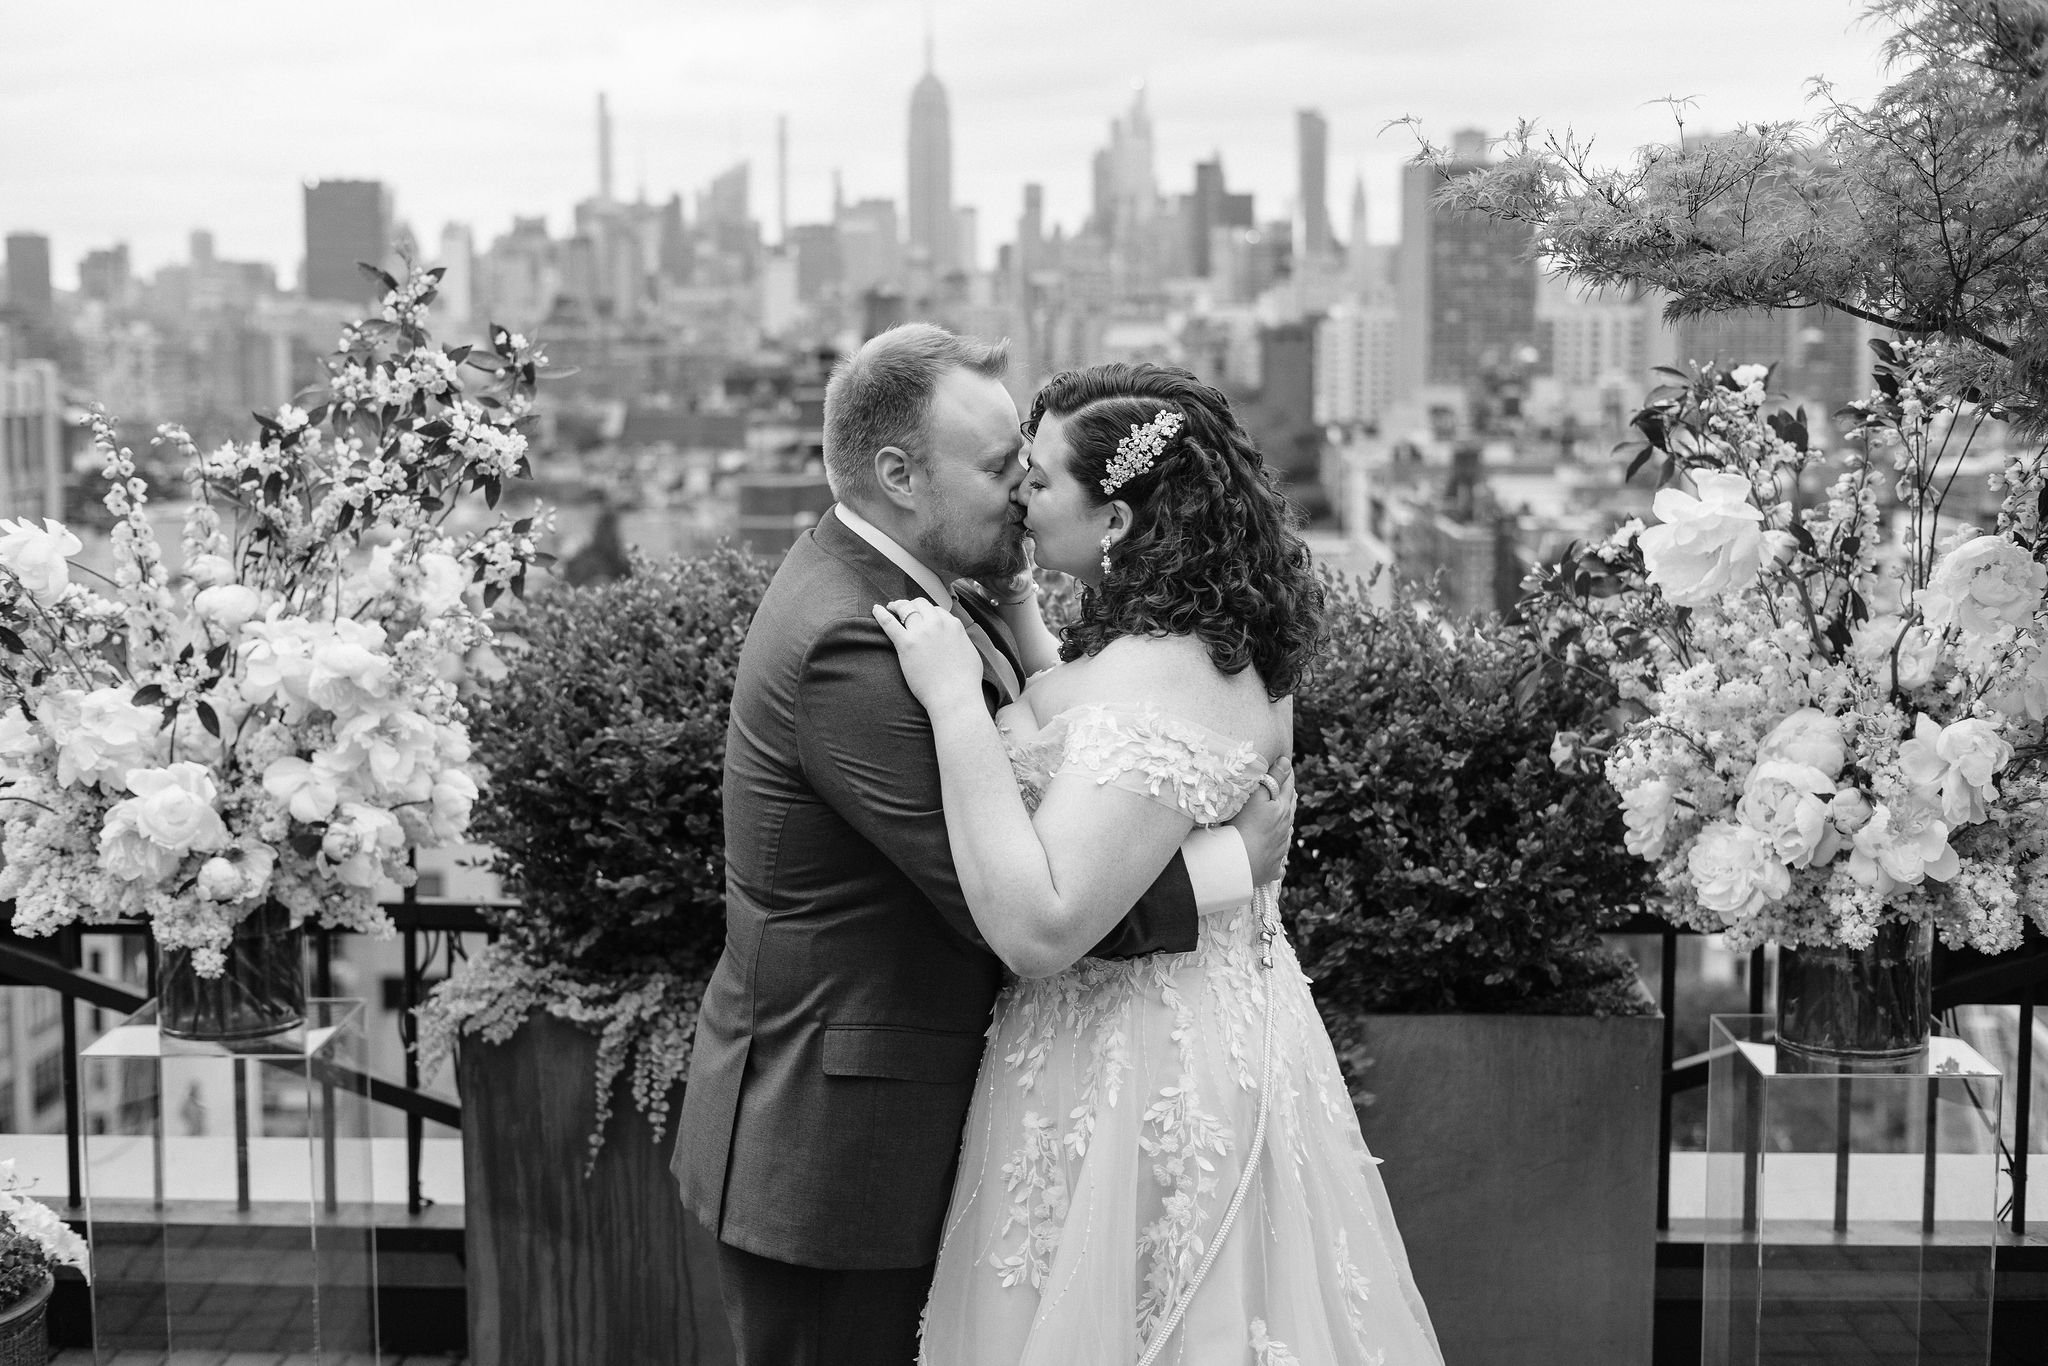 Summer Multicultural wedding in New York, NY | BLB Events | Wedding Planner | Rima Brindamour Photography | Soho Grand Penthouse